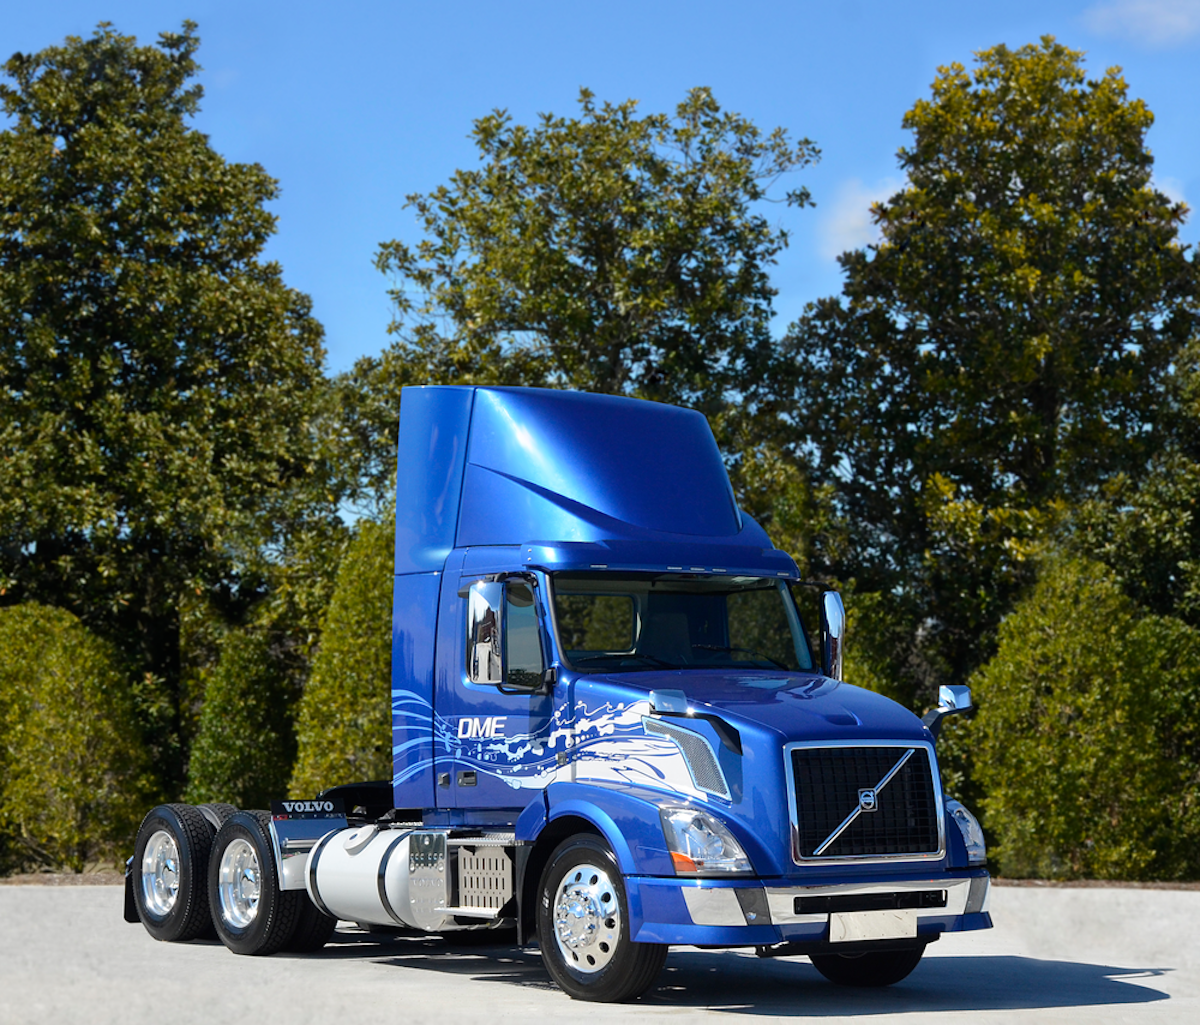 Volvo Trucks Commercializing Dme Fueled Trucks In North America Oem Off Highway